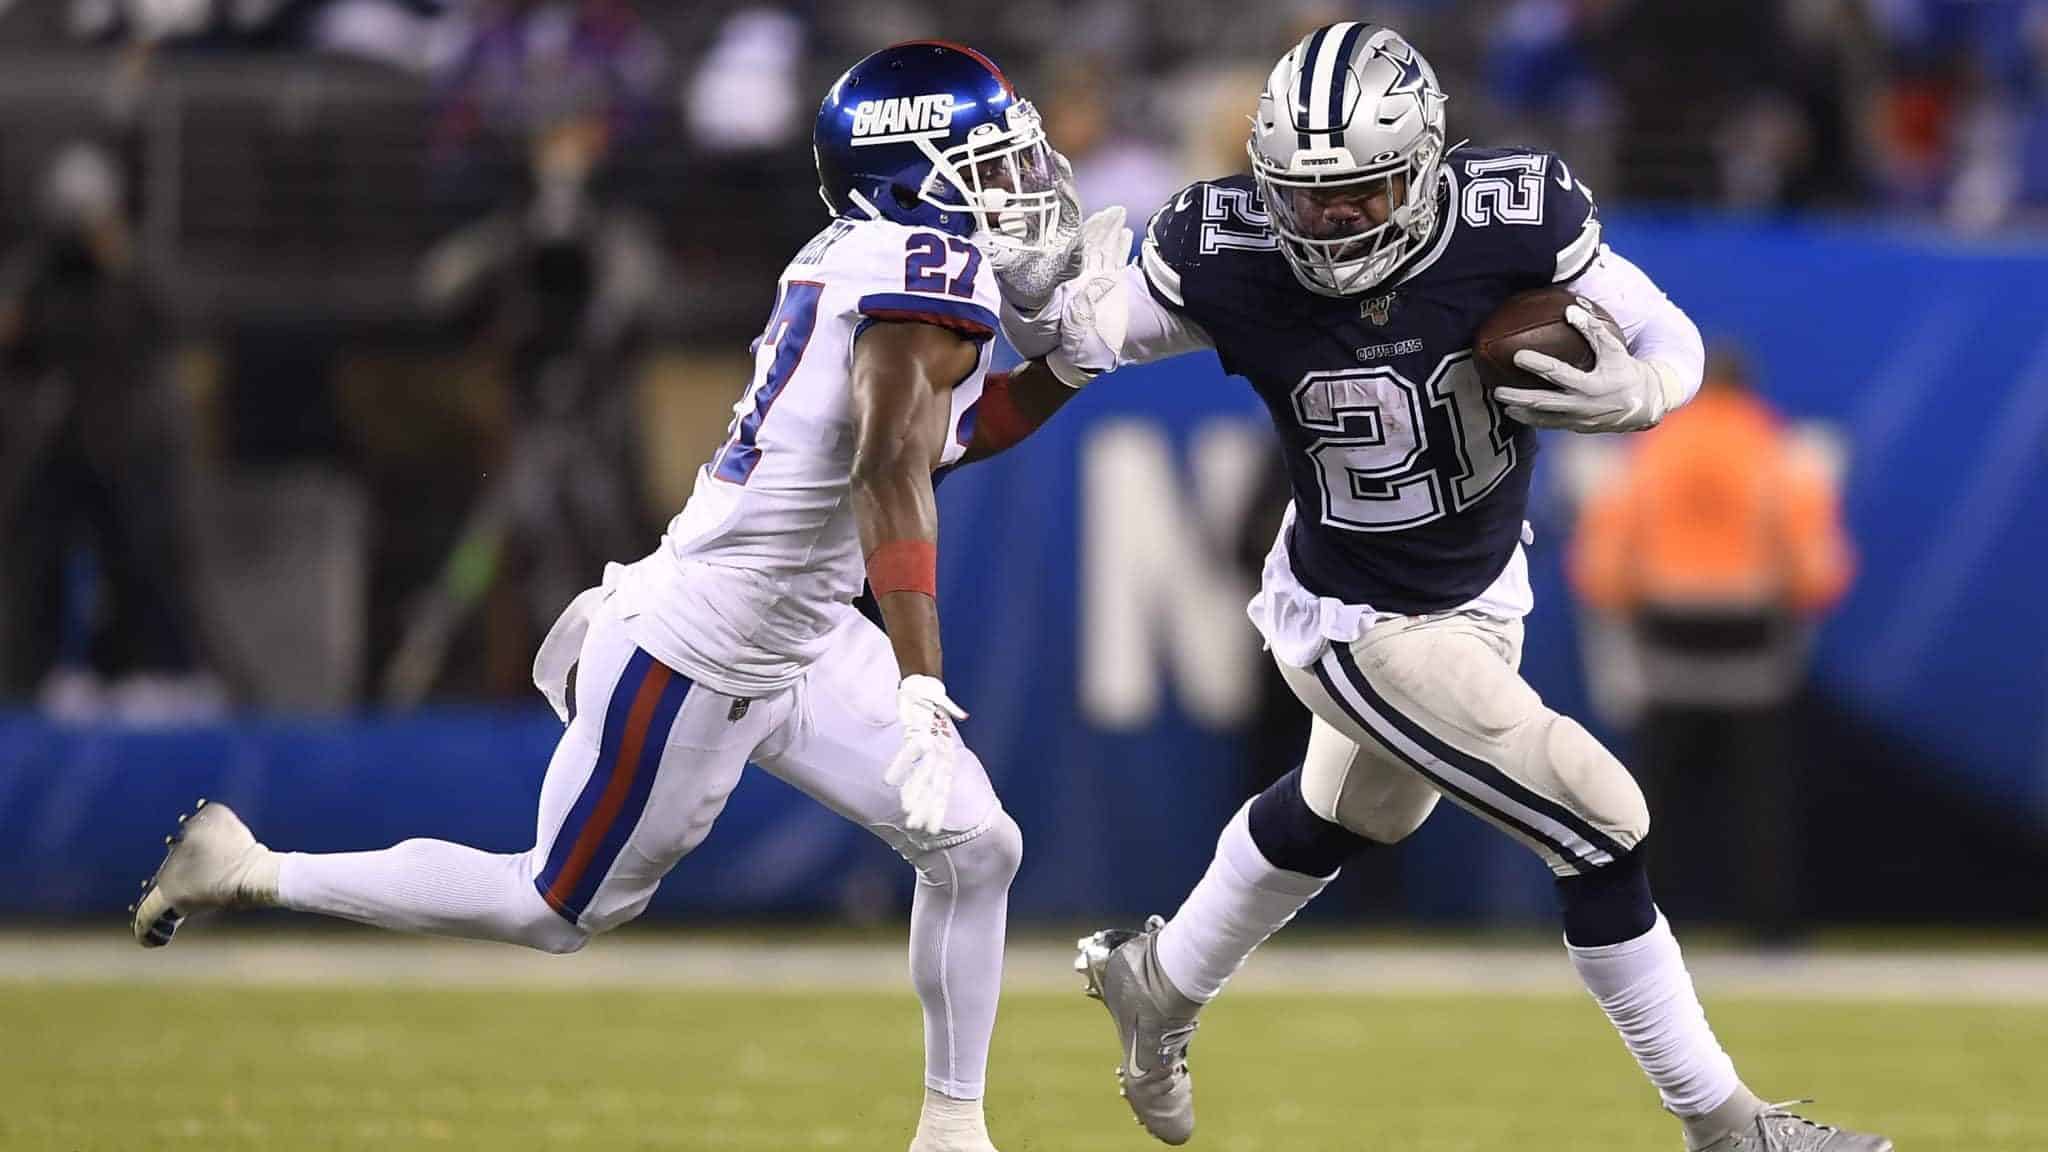 EAST RUTHERFORD, NEW JERSEY - NOVEMBER 04: Ezekiel Elliott #21 of the Dallas Cowboys carries the ball as Deandre Baker #27 of the New York Giants defends during the fourth quarter of the game at MetLife Stadium on November 04, 2019 in East Rutherford, New Jersey.